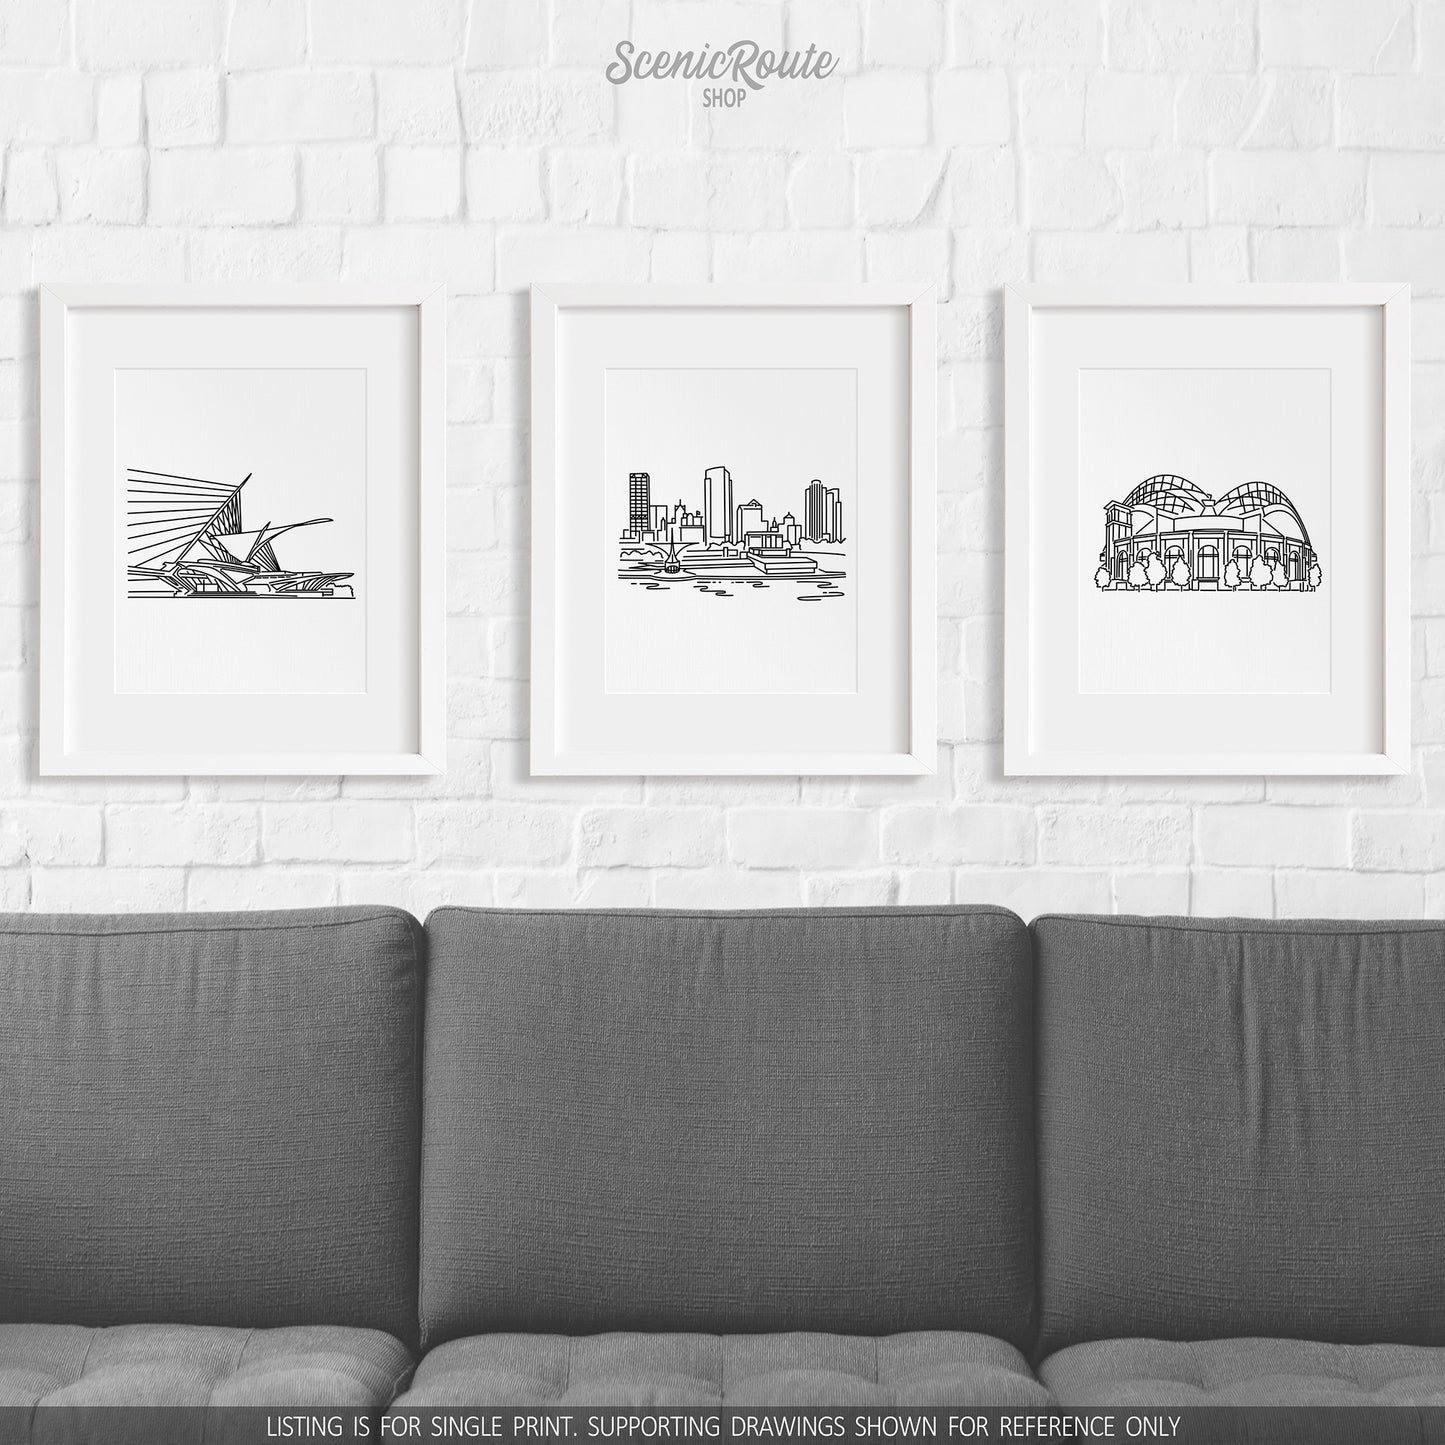 A group of three framed drawings on a wall above a couch. The line art drawings include the Milwaukee Art Museum, the Milwaukee Skyline, and Brewers Ballpark